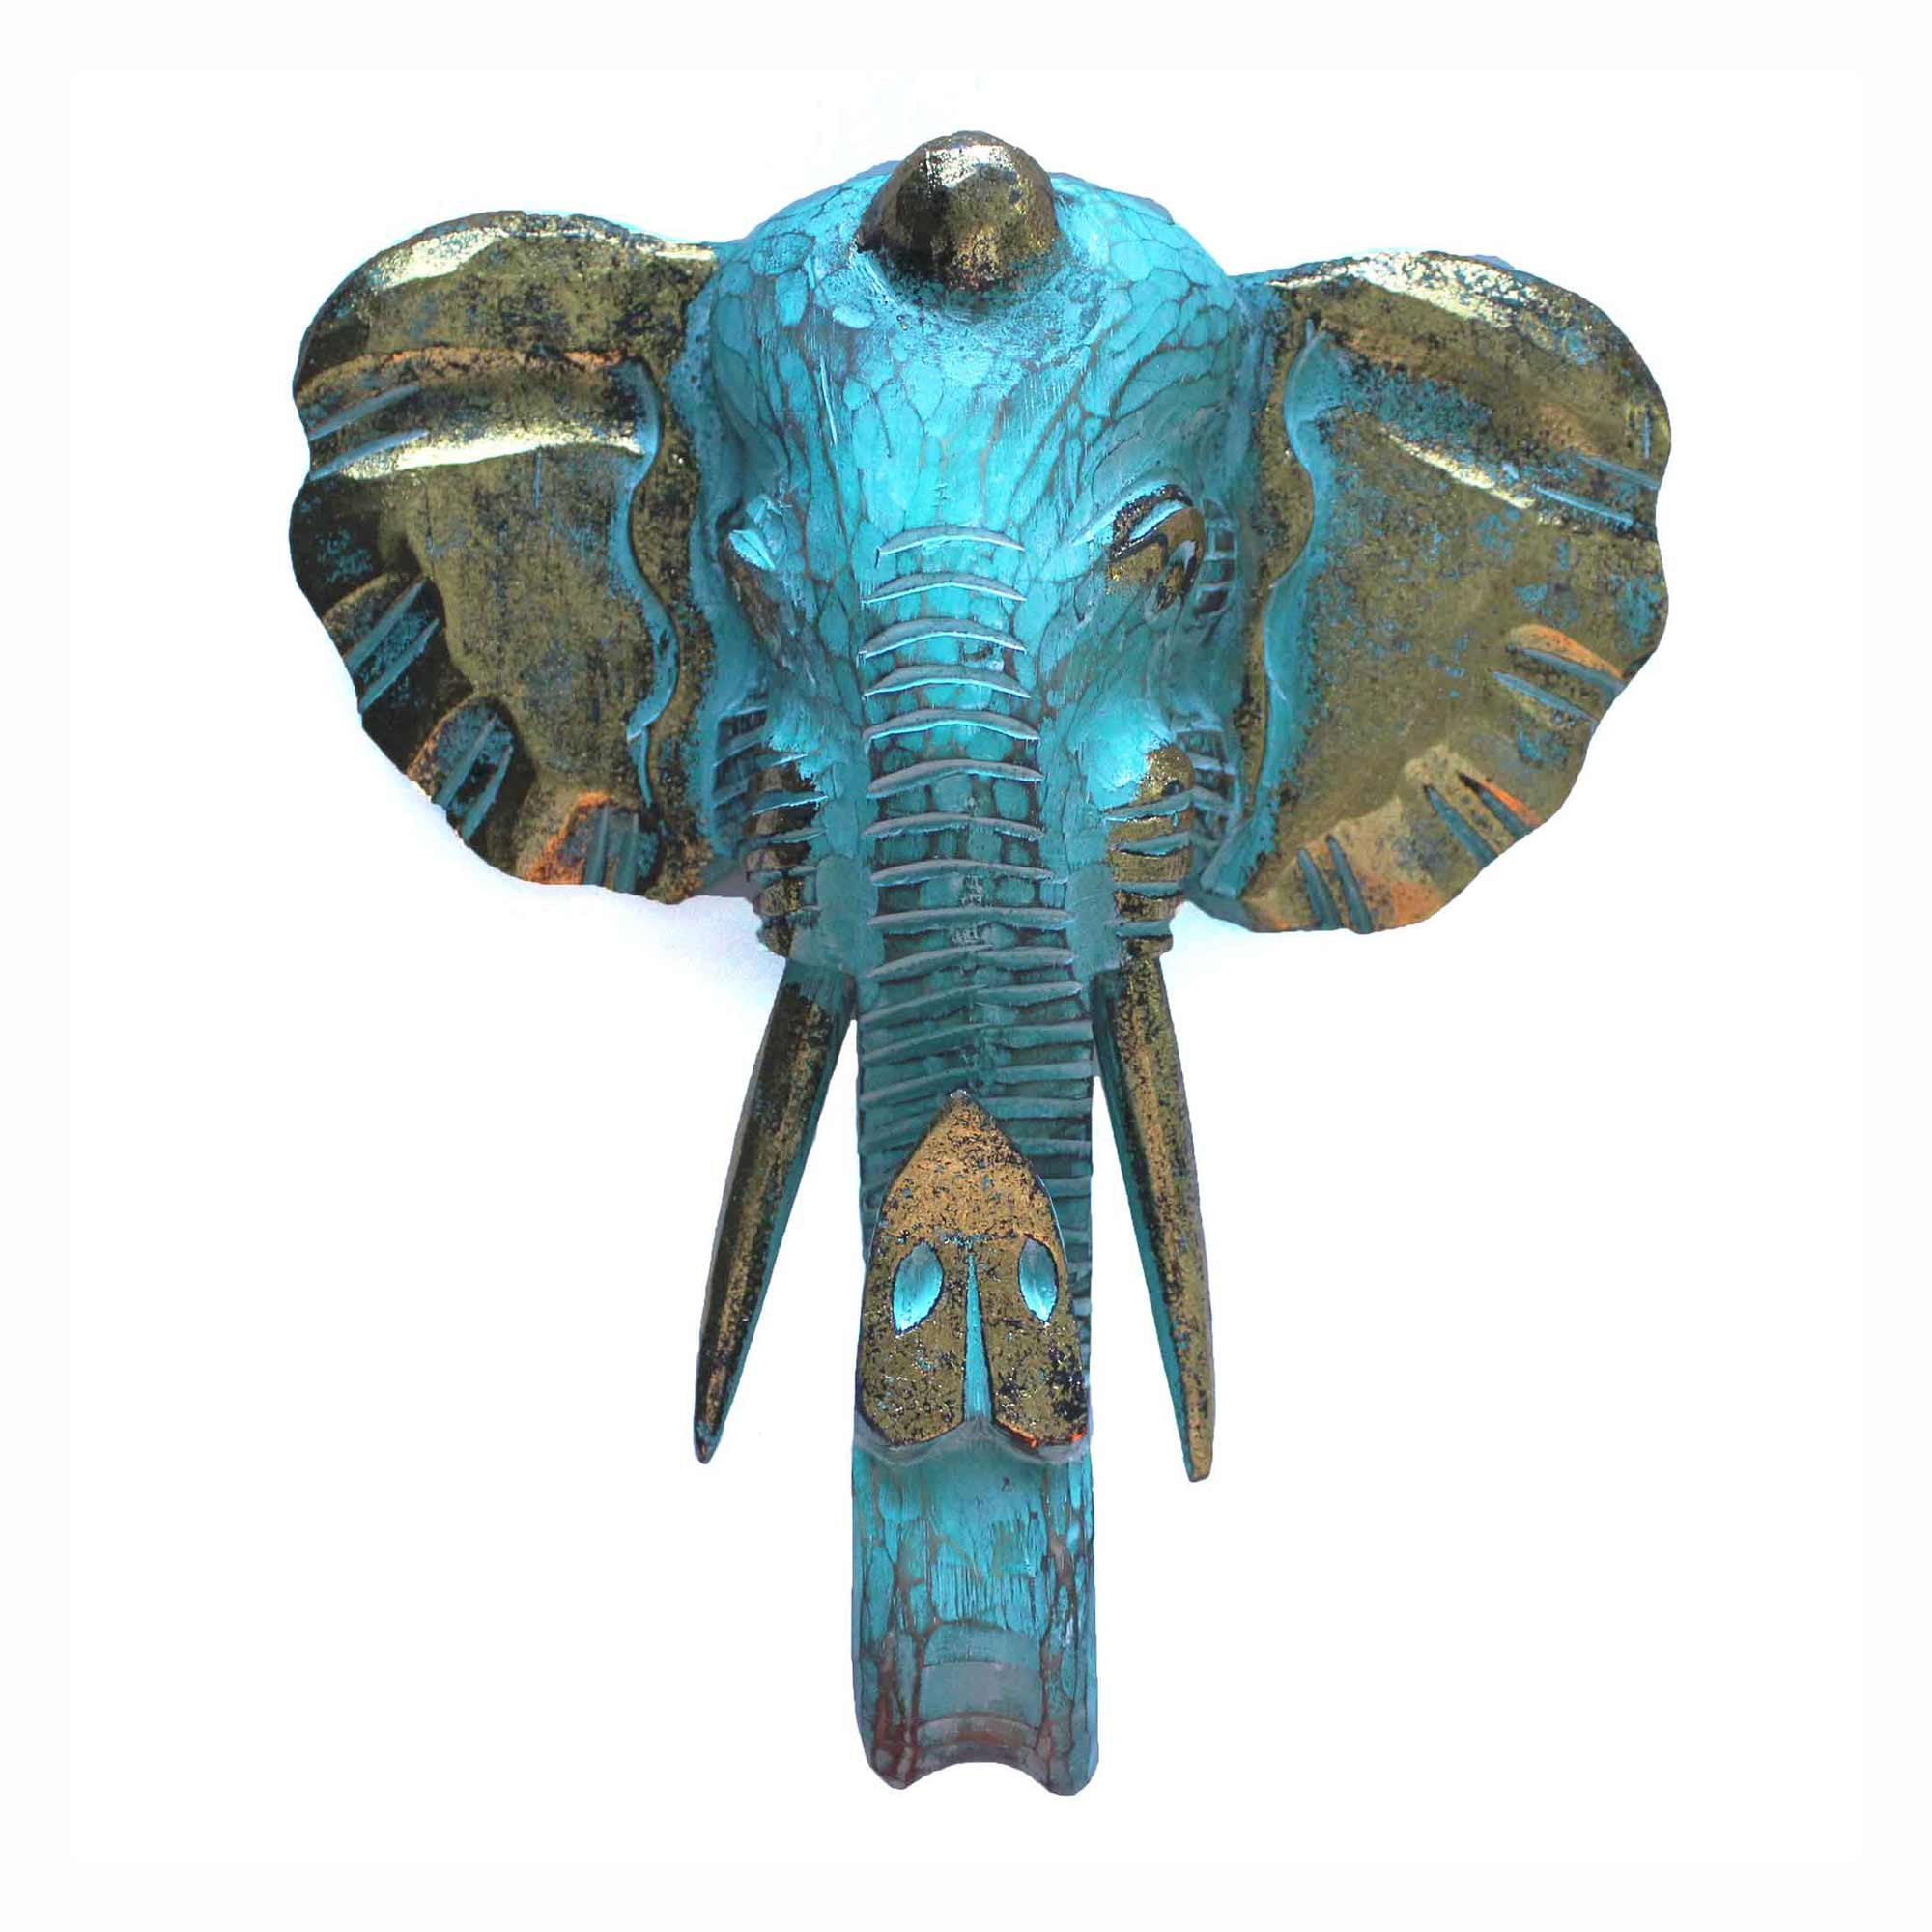 View Large Elephant Head Gold Turquoise information